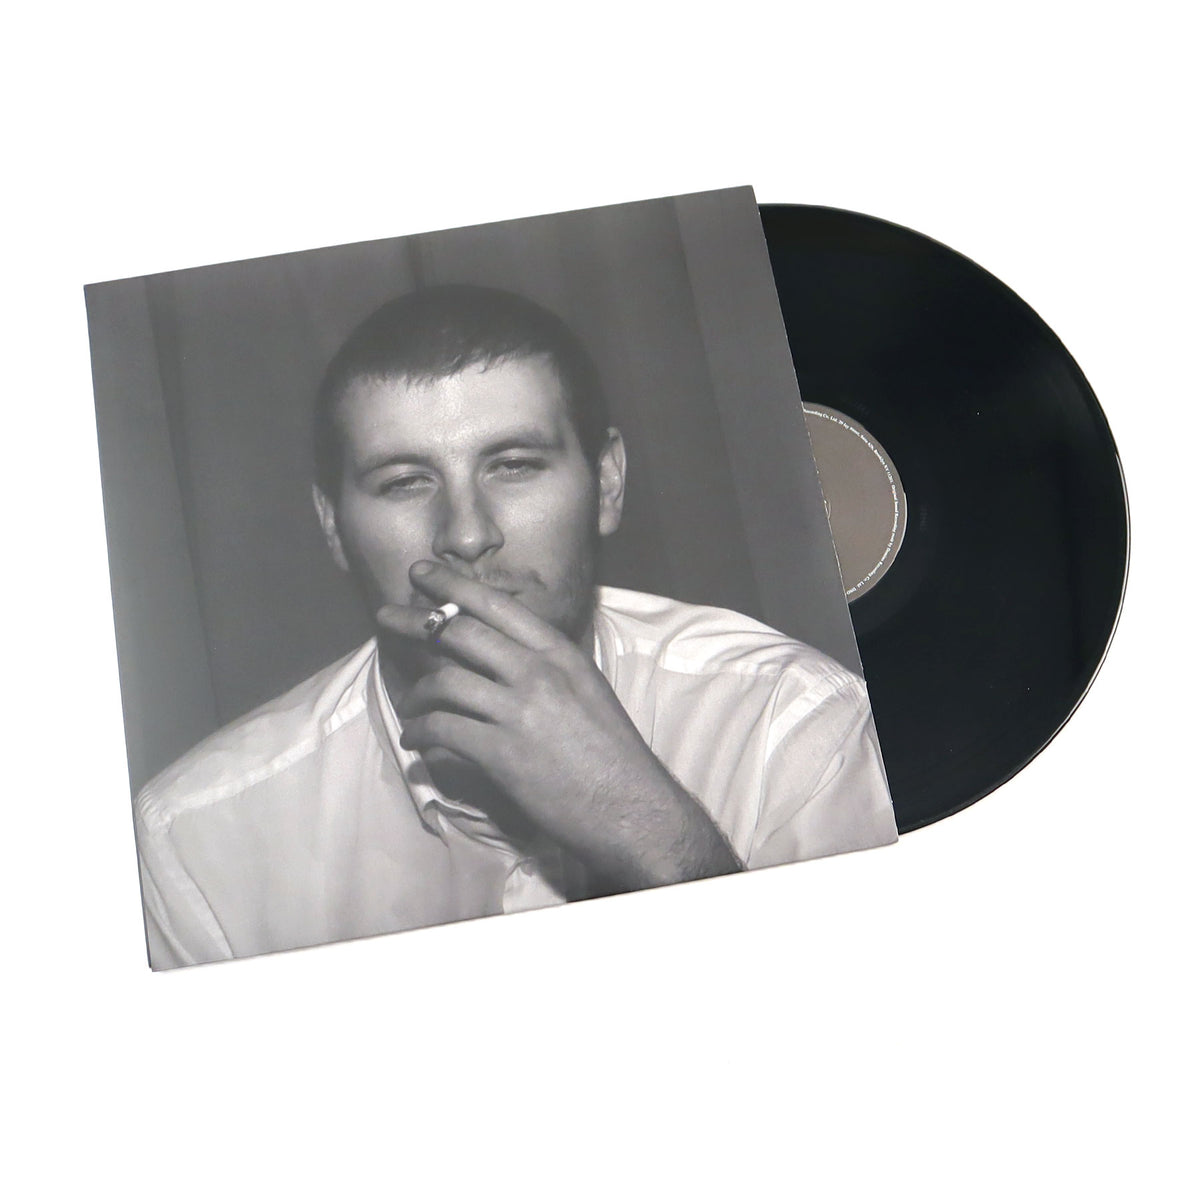 Arctic Monkeys: Whatever People Say I Am, That's What I'm Not Vinyl LP —